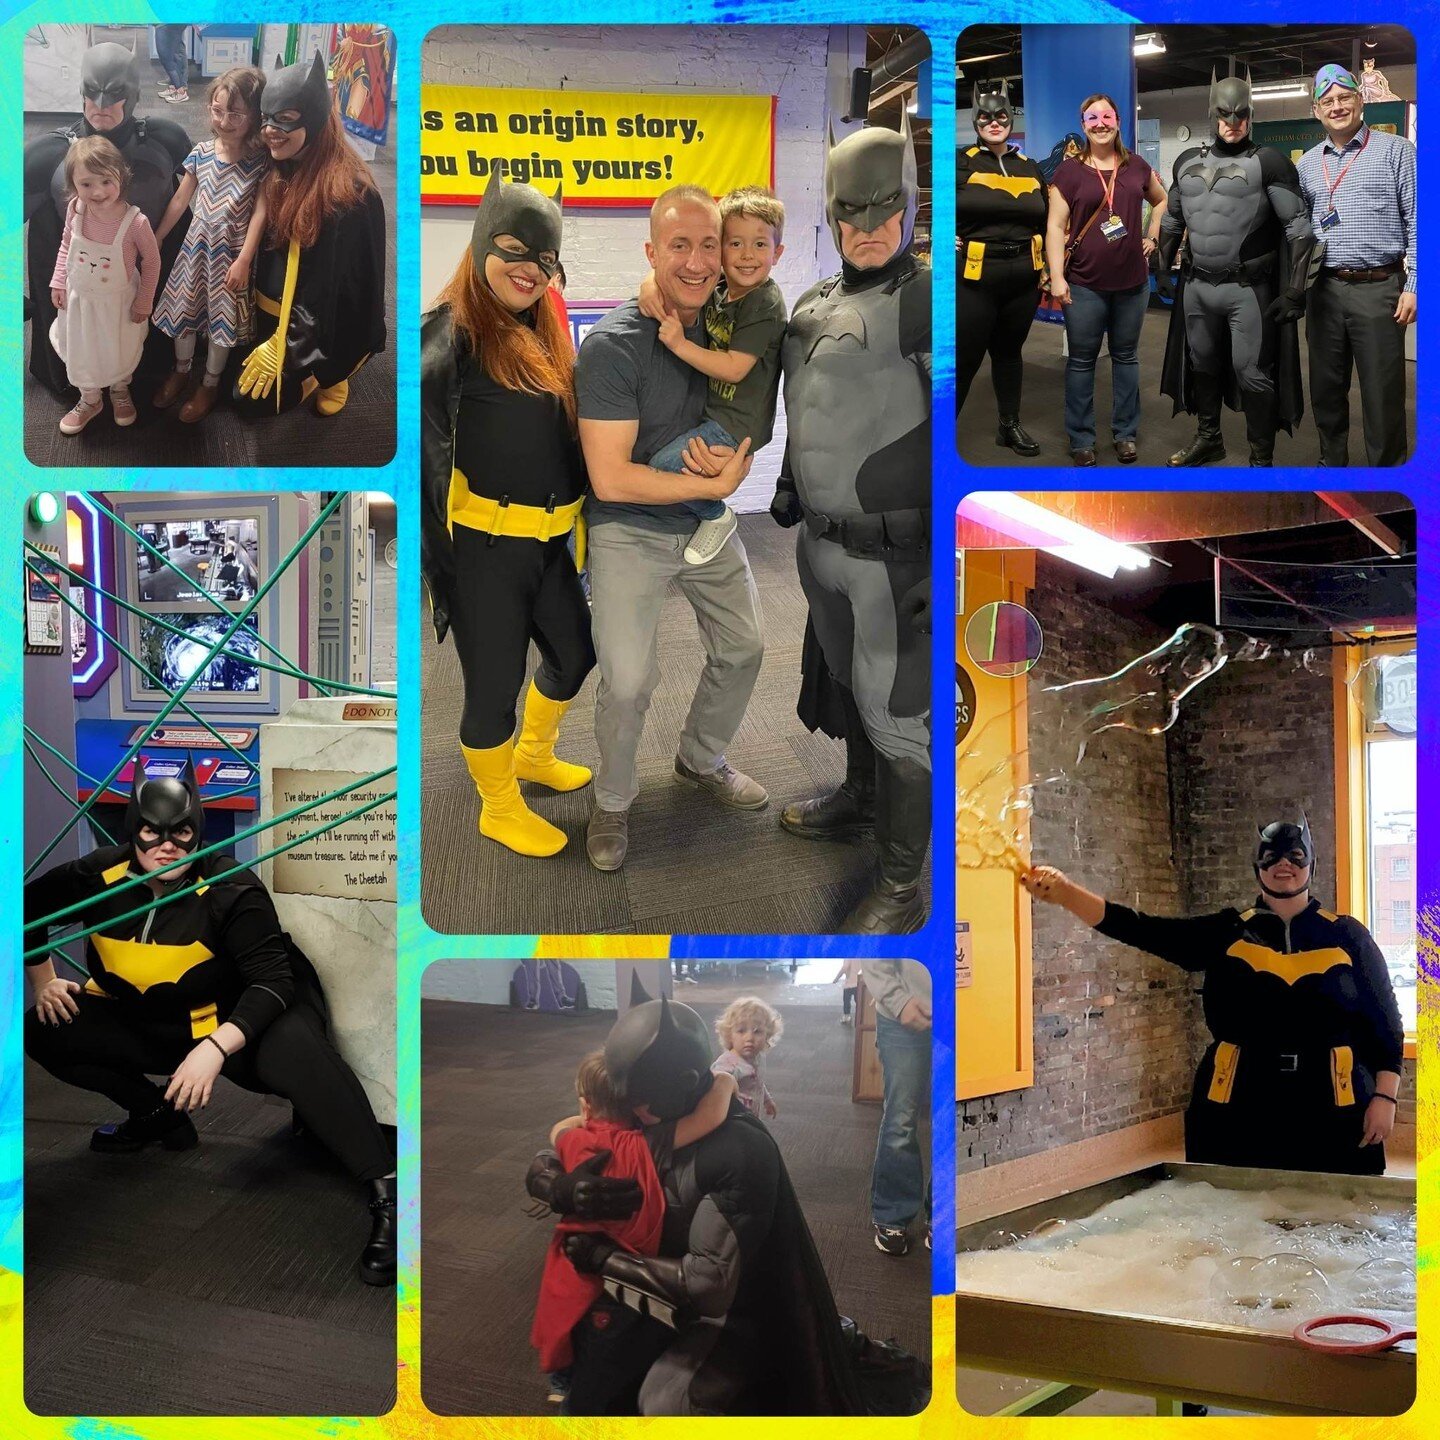 The League of Enchantment&rsquo;s dark knights donned their suits for the Impression 5 Science Center 50th Donor Celebration and Member Night with DC superheroes! Impression 5 Science Center is grateful for all the generosity that has made them the v